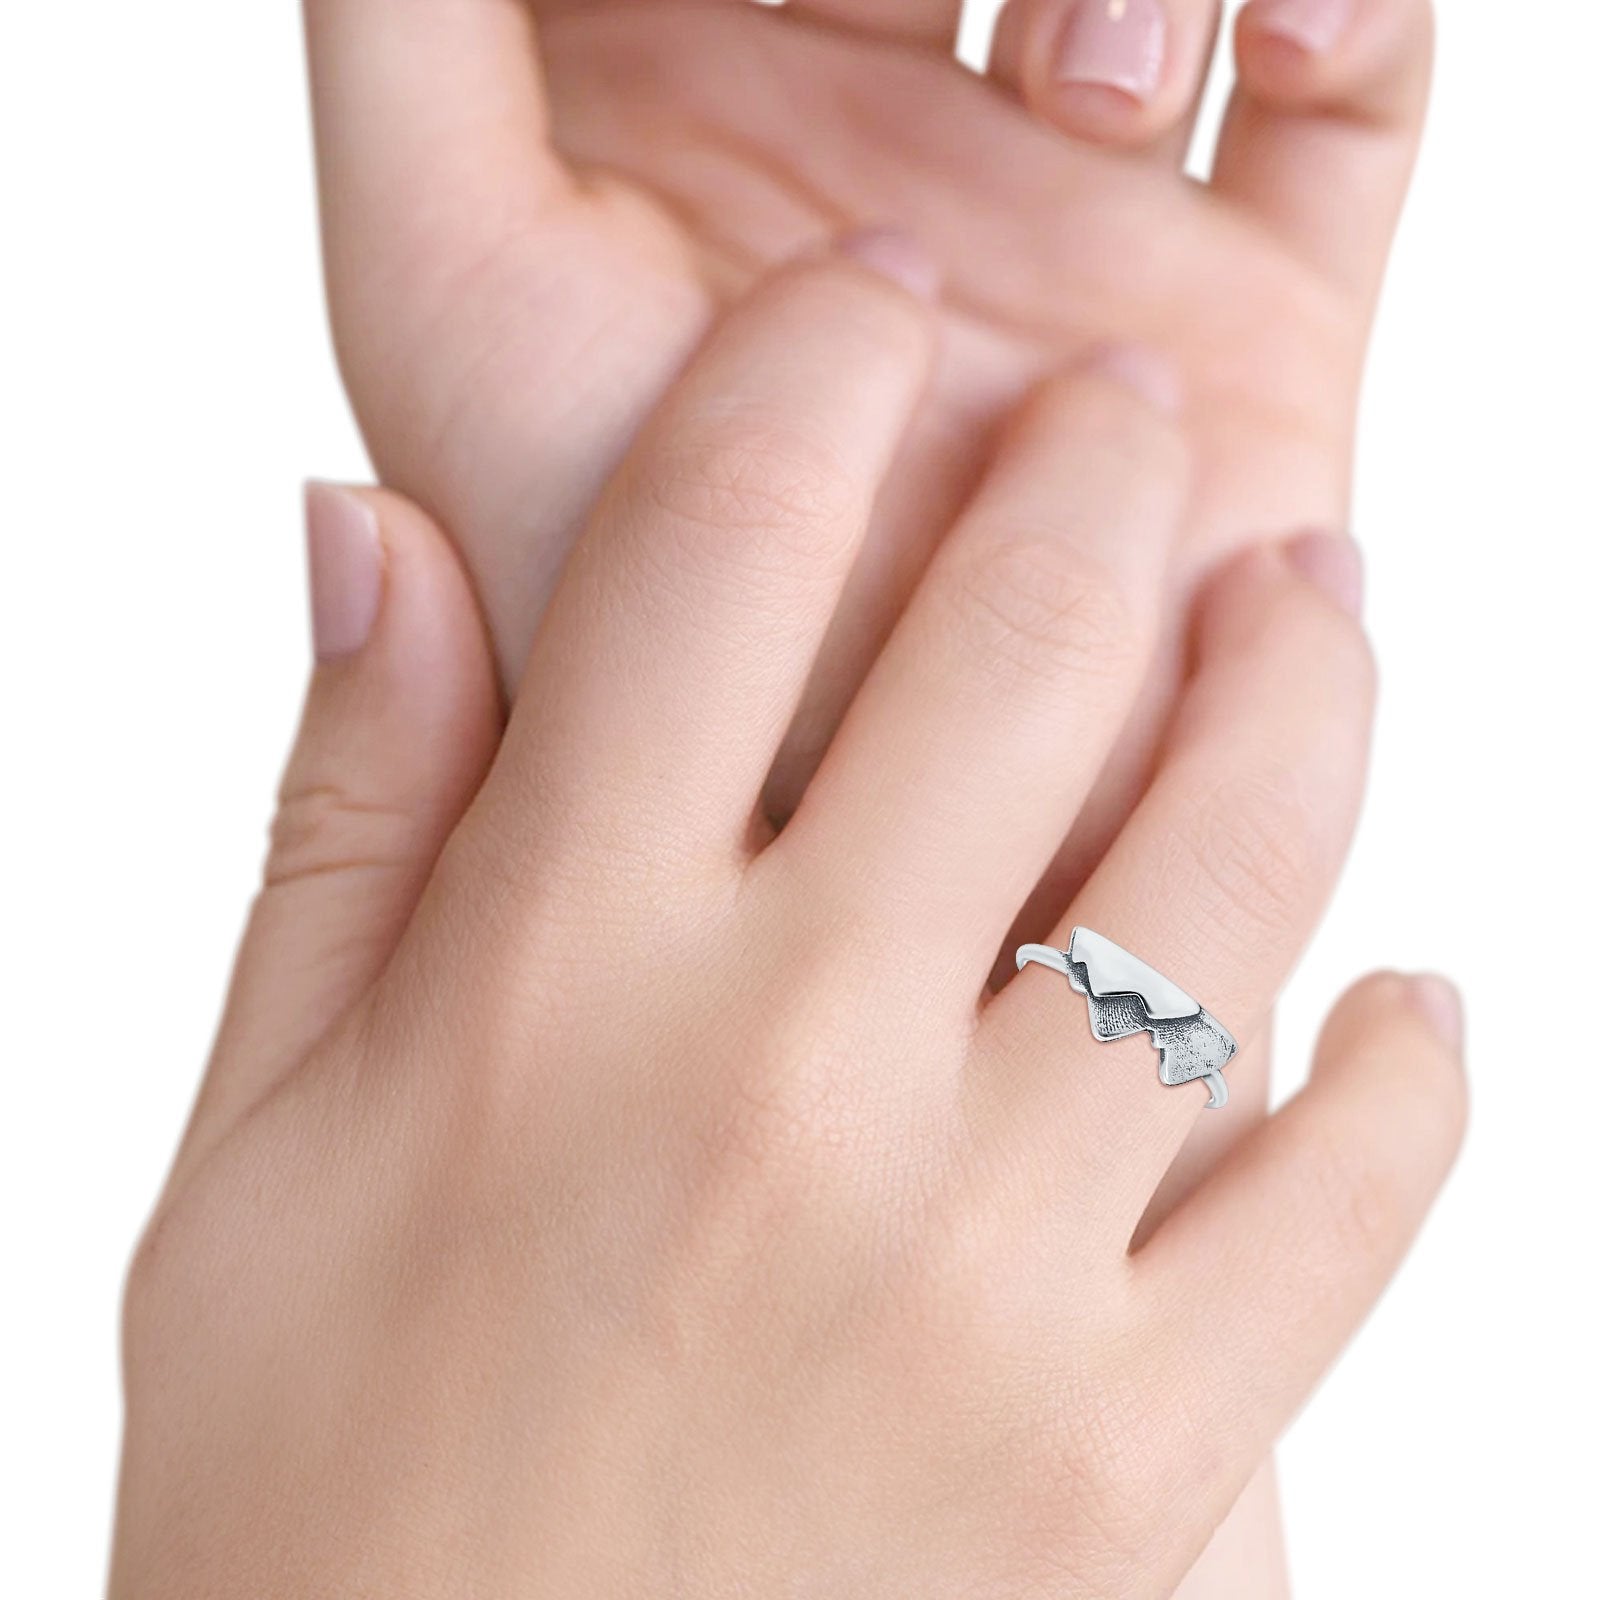 Minimalist Trendy Petite Dainty Snow Mountains Fashion Band Ring Solid 925 Sterling Silver Thumb Ring